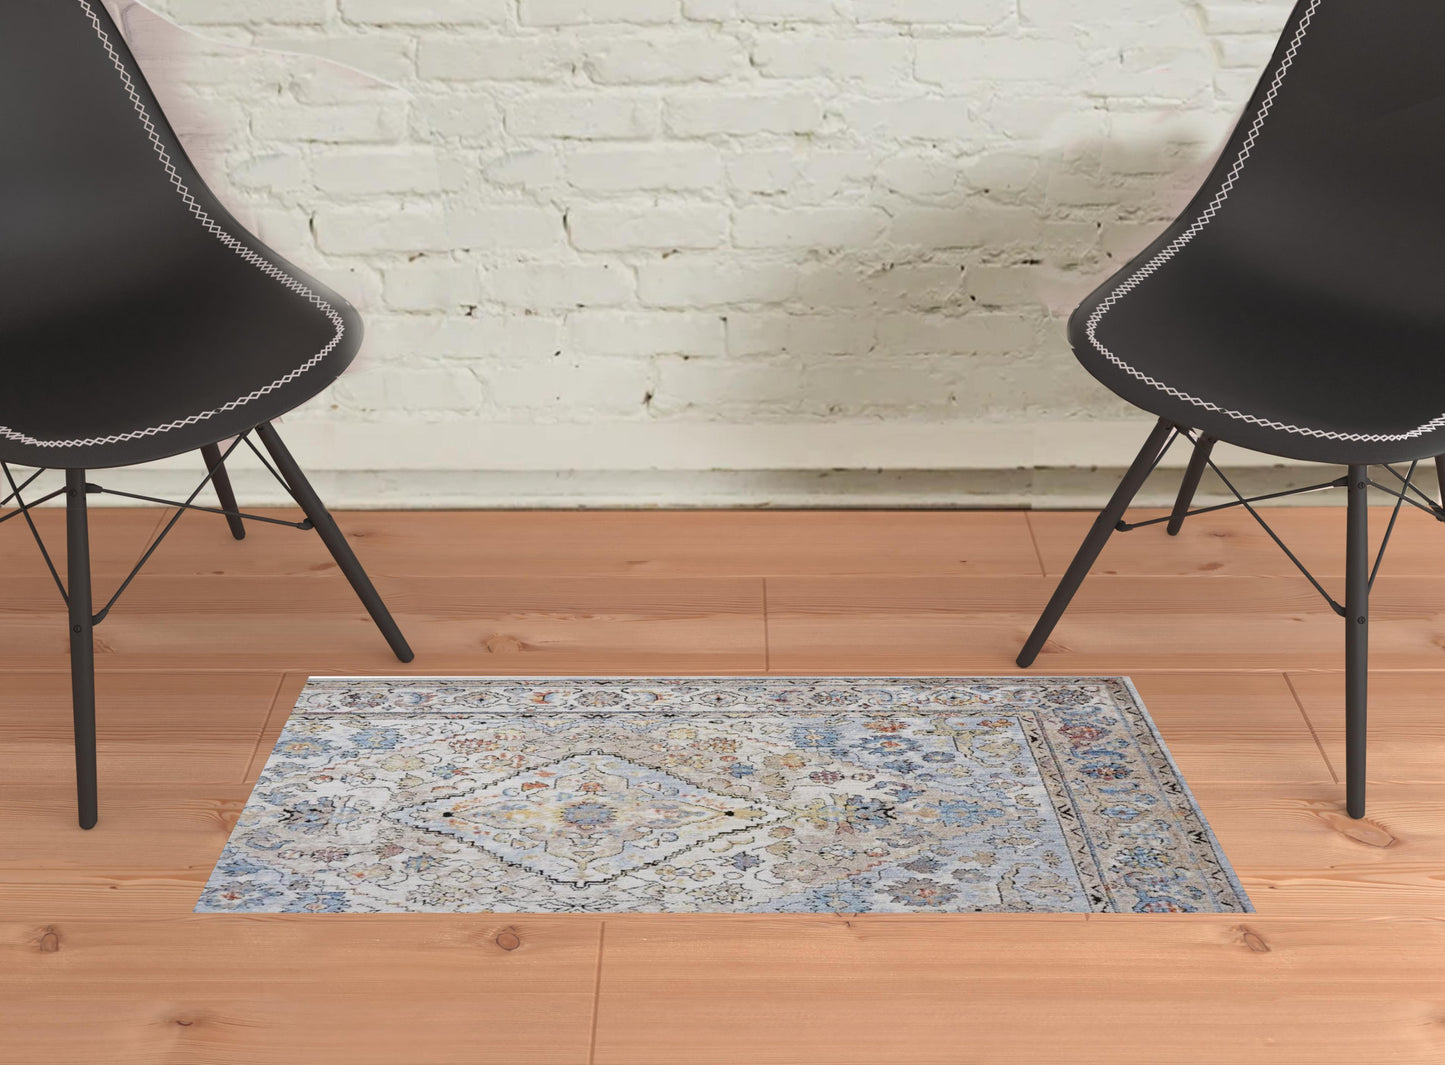 4' x 6' Blue and Gray Floral Area Rug